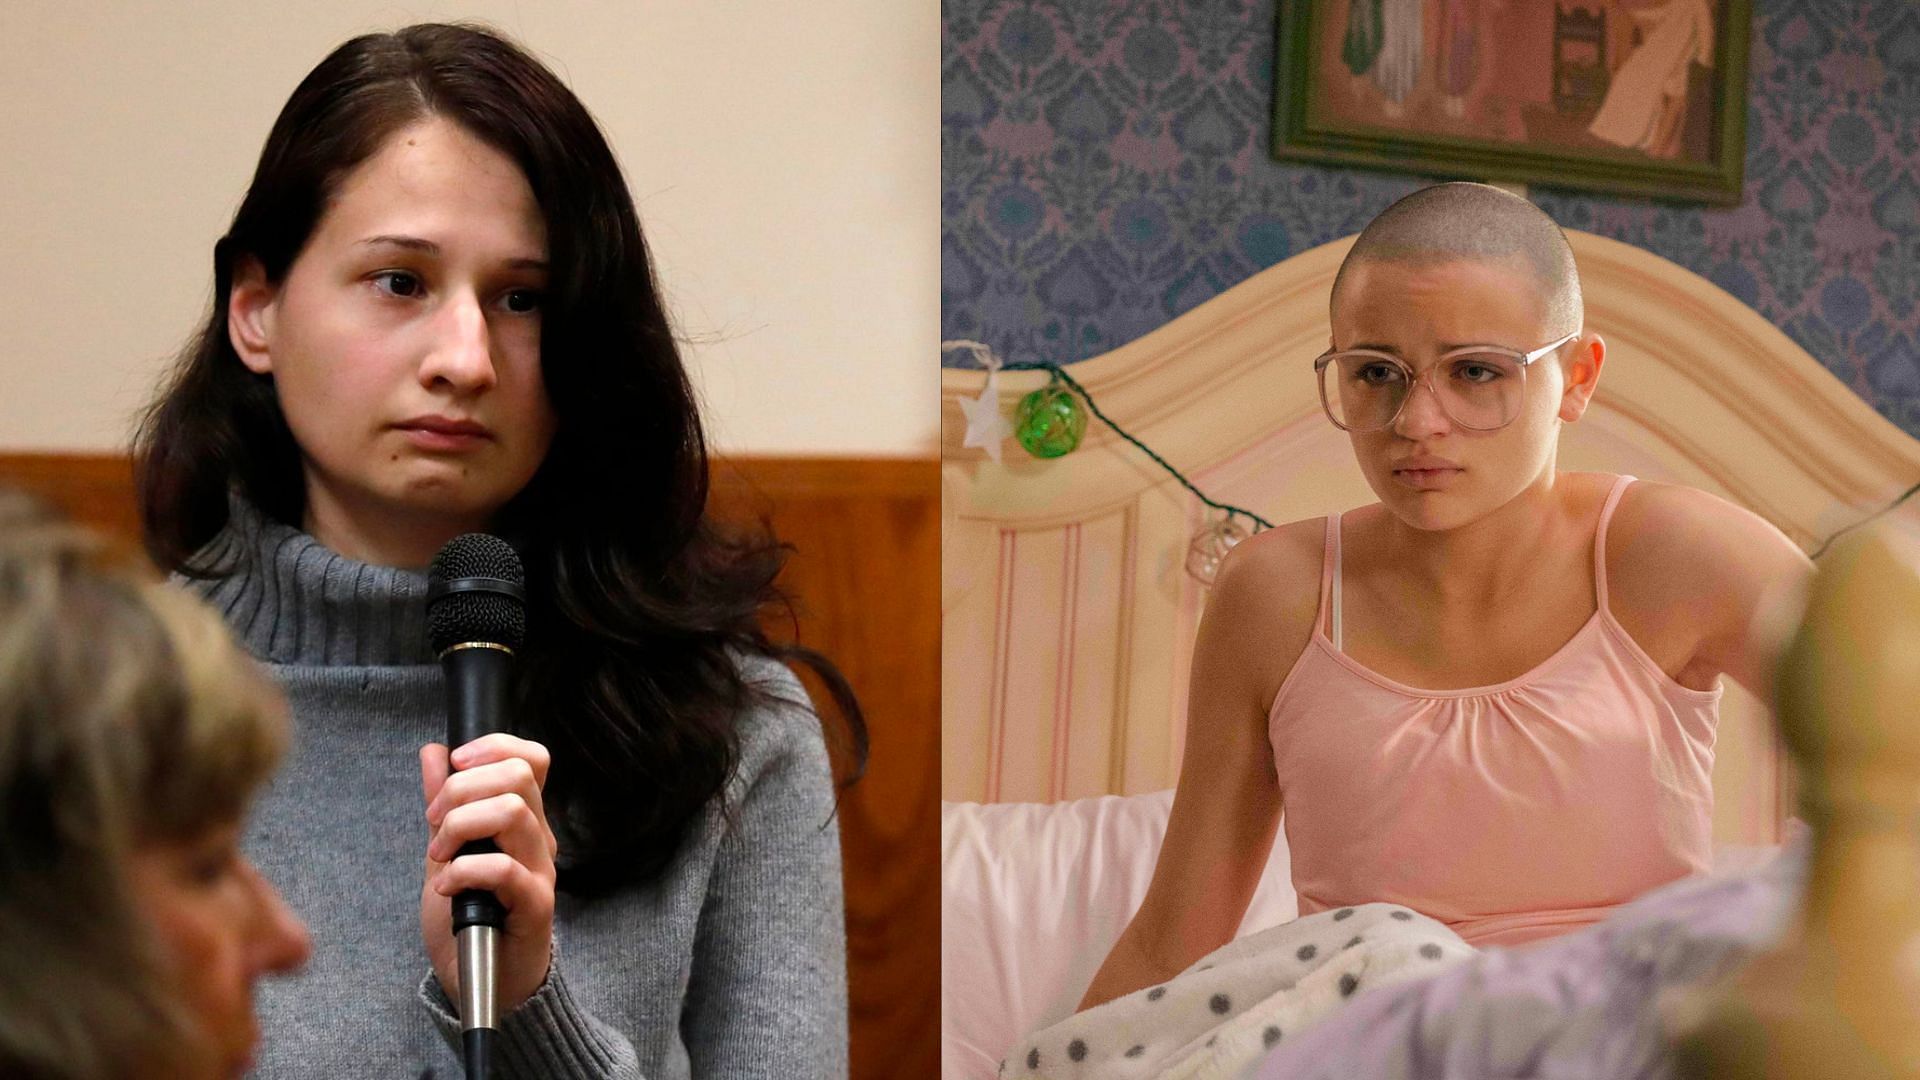 (L) The real Gypsy and her (R) Hulu version (Images via Nathan Papes and Hulu)